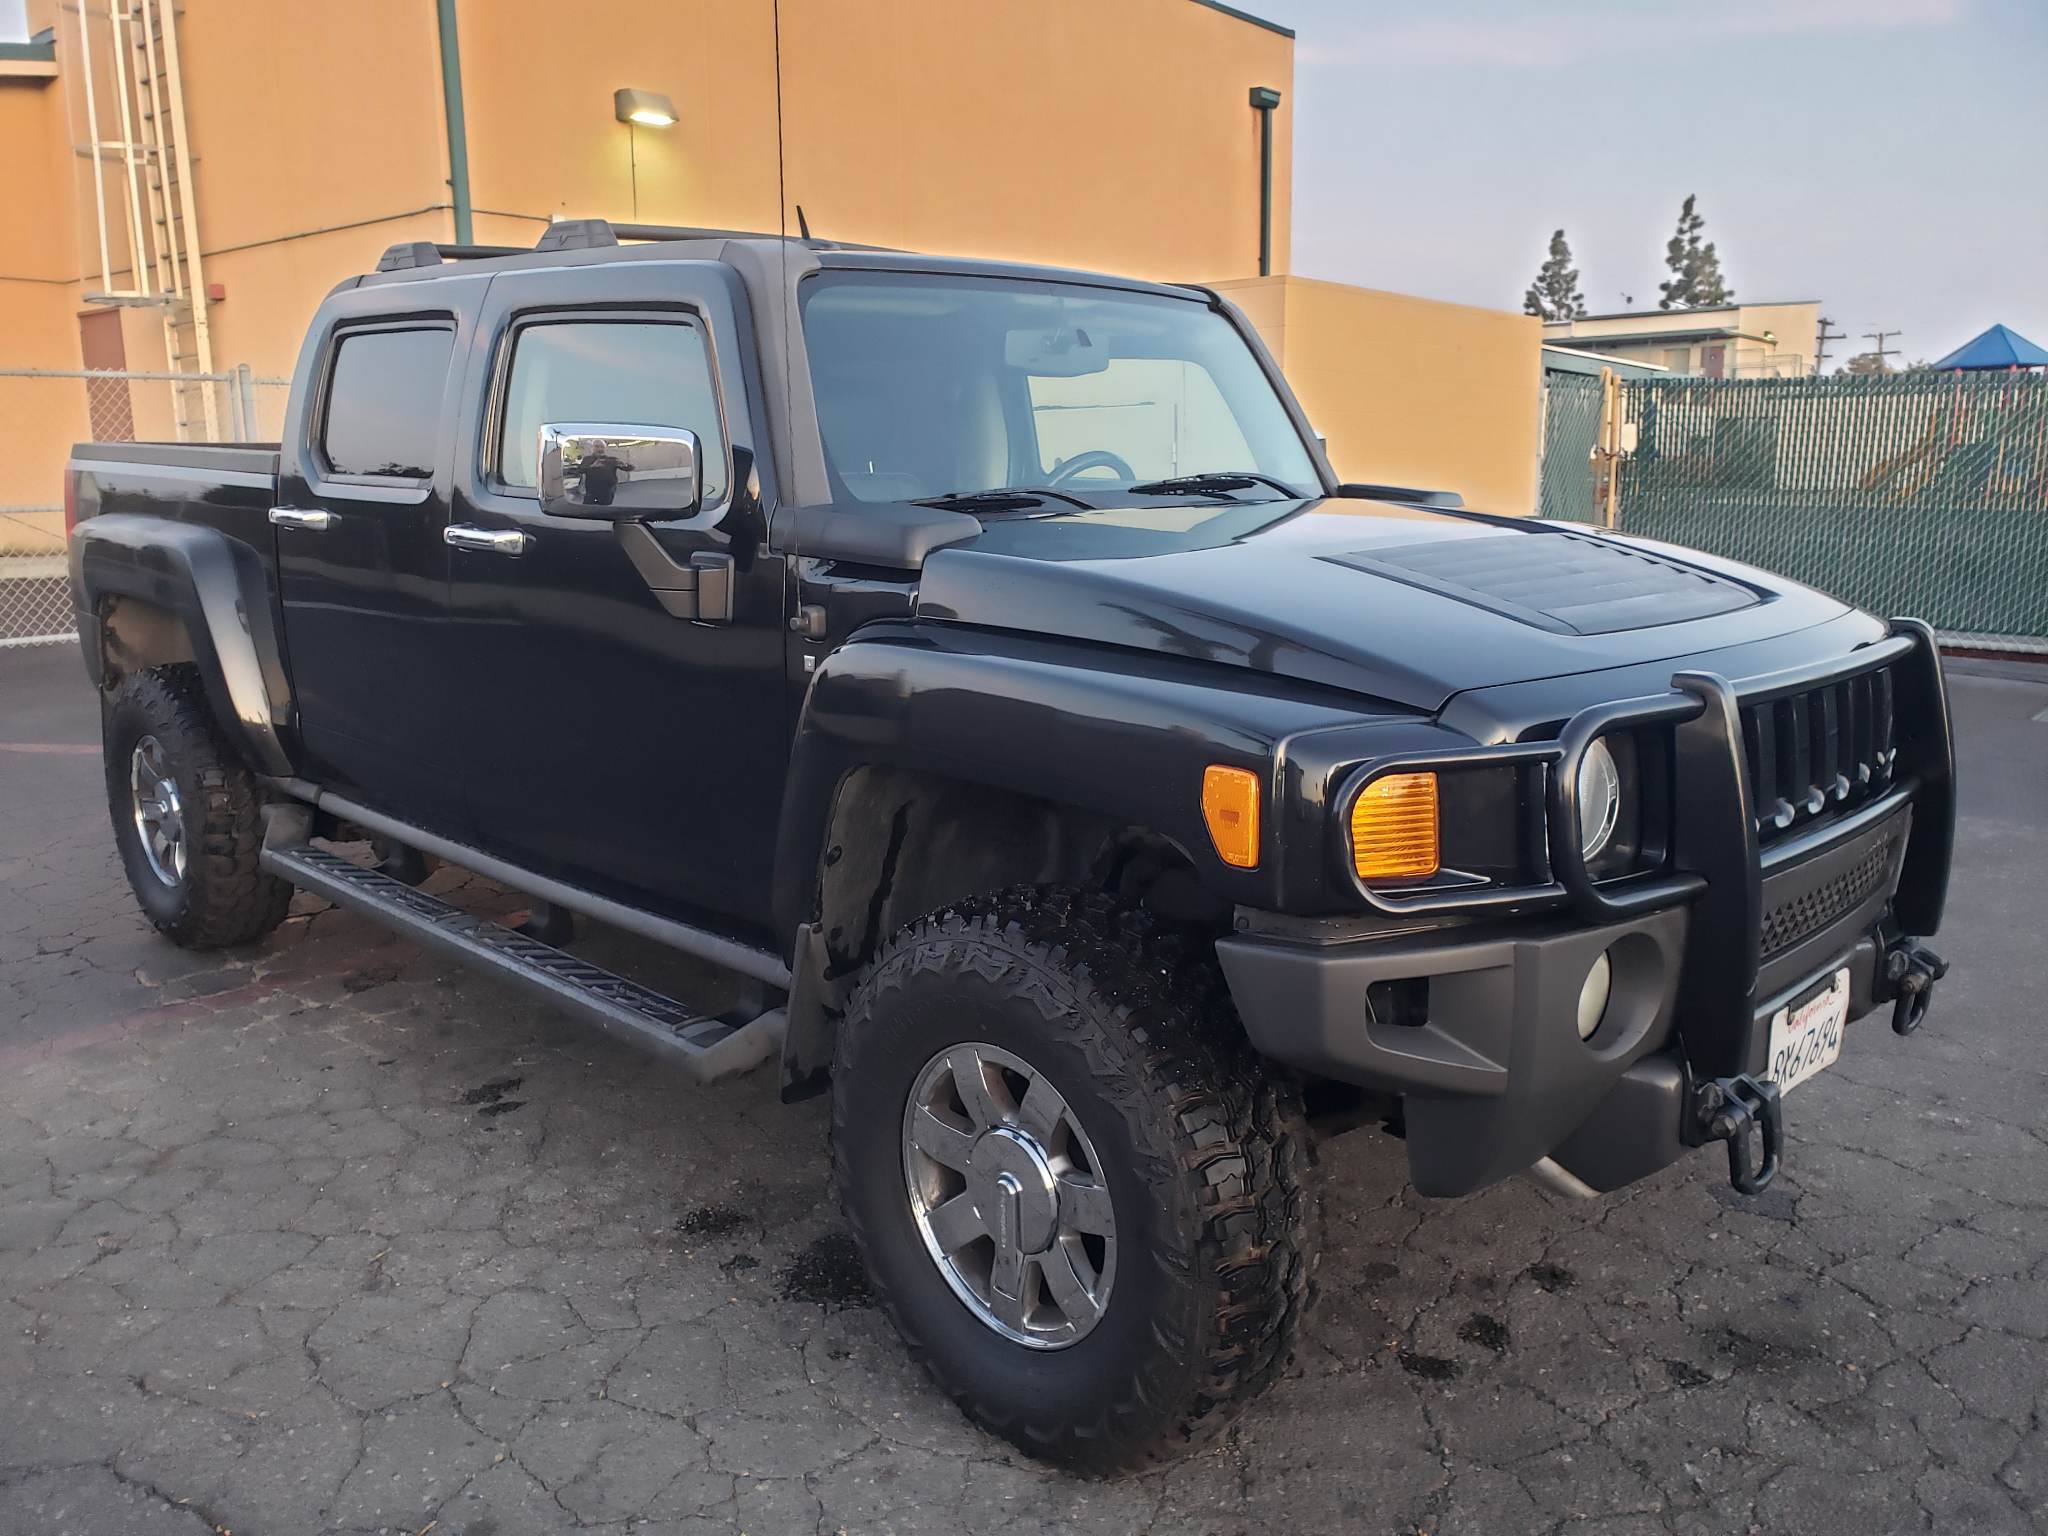 Used HUMMER H3T for Sale Right Now - Autotrader